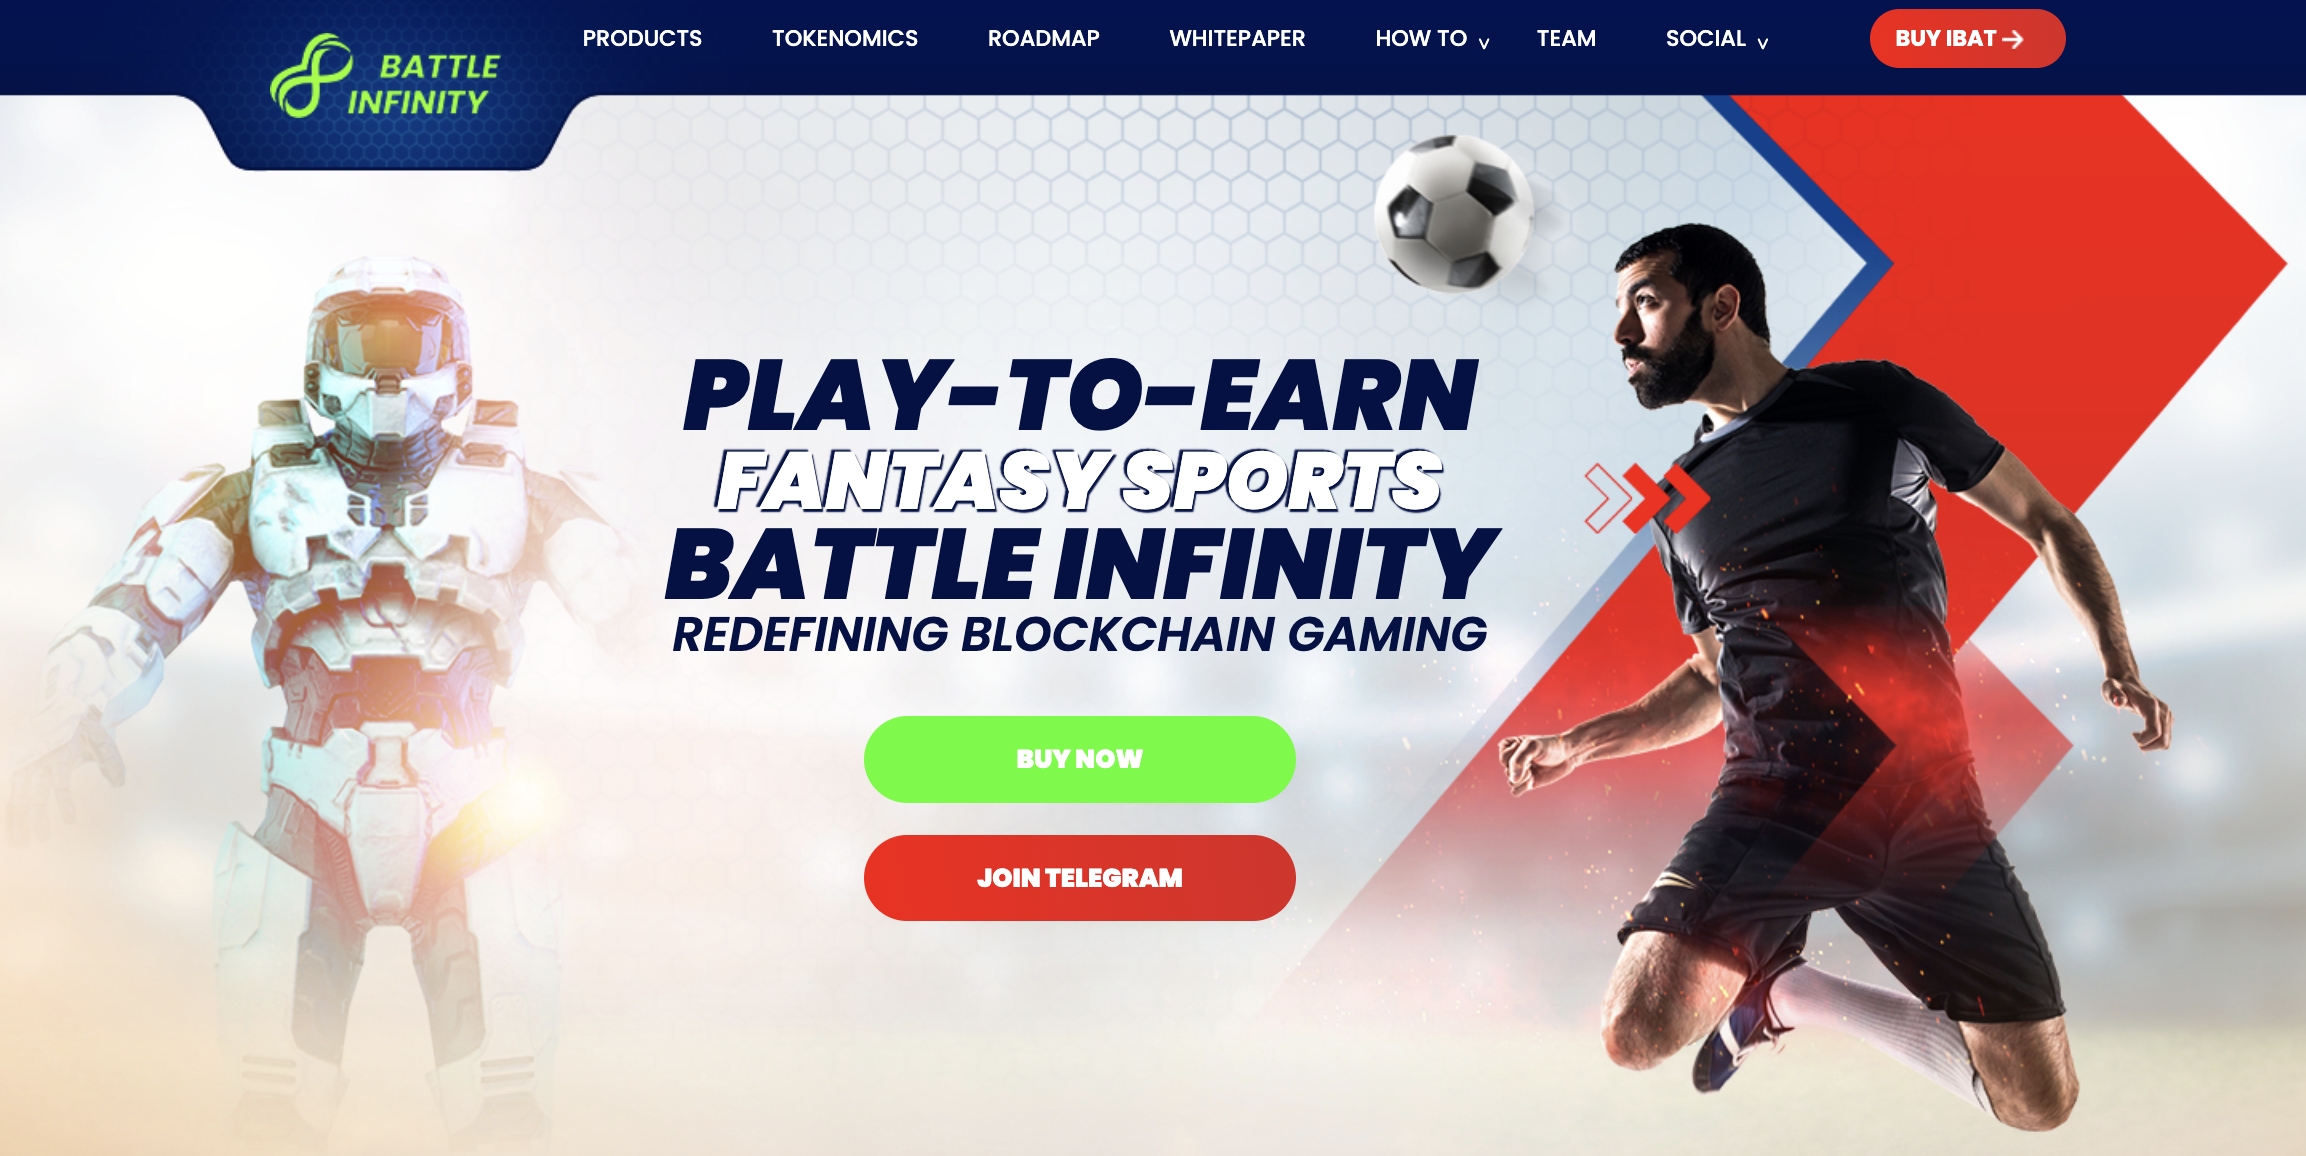 Battle Infinity play-to-earn project